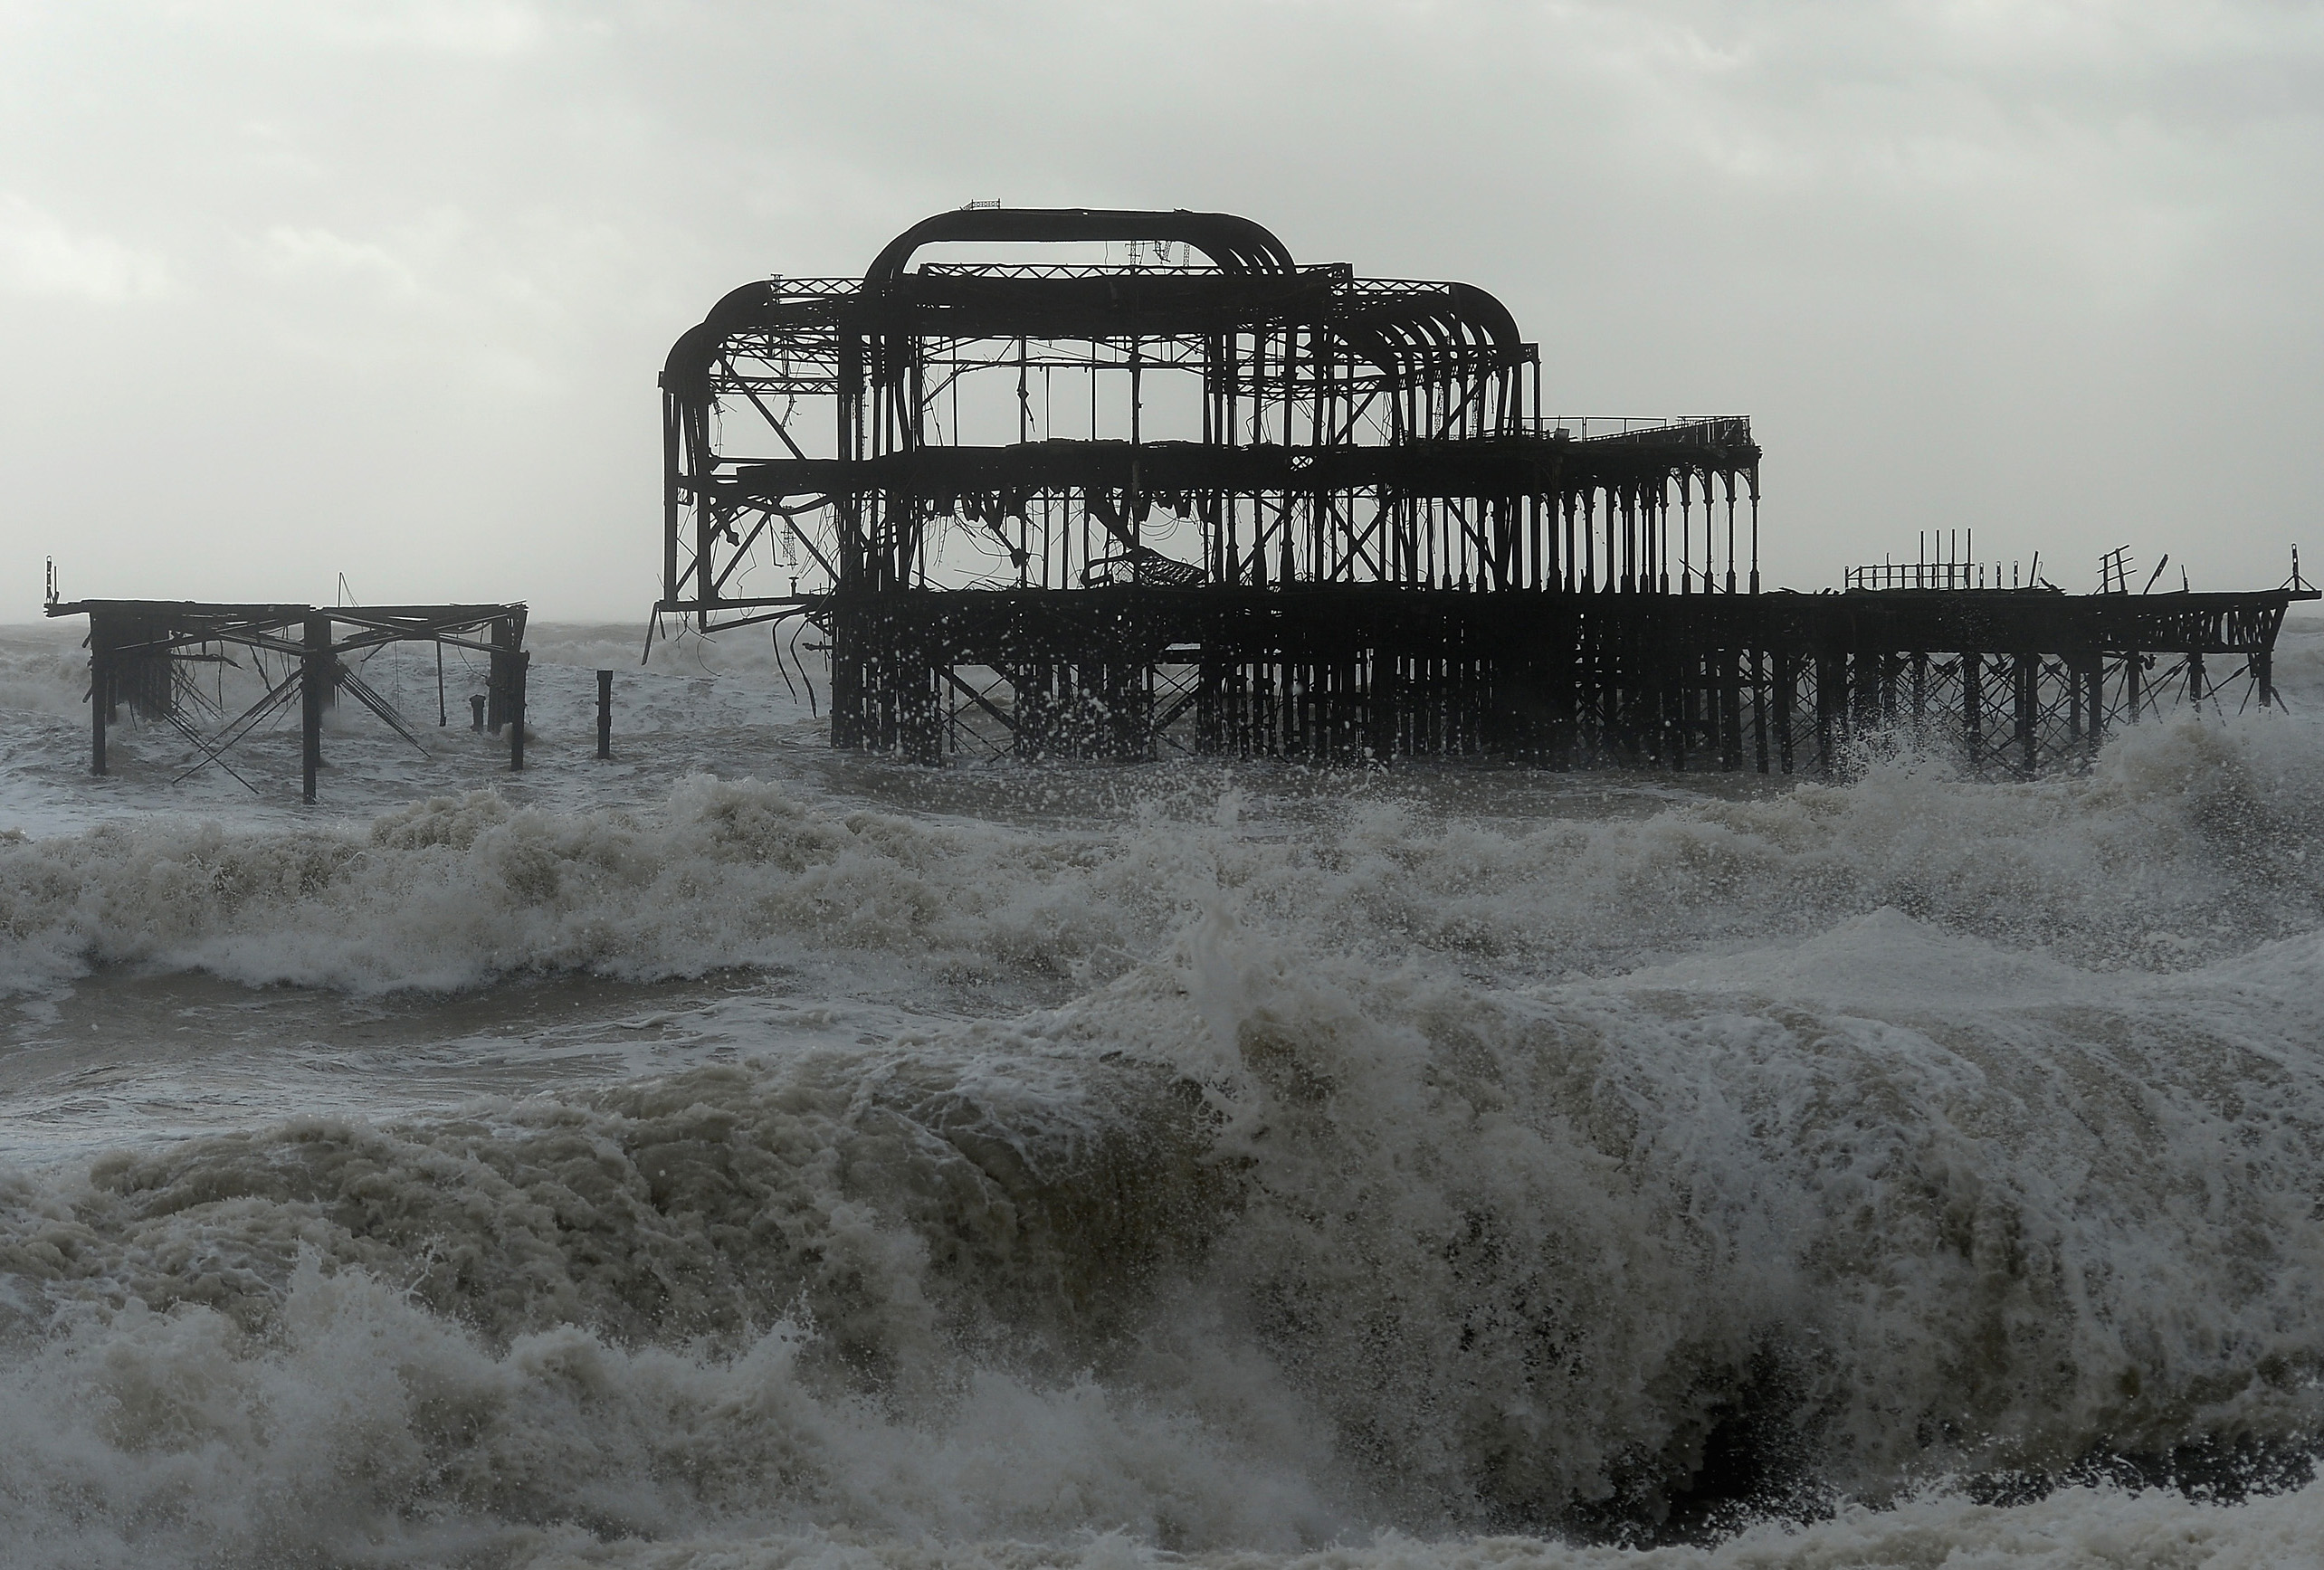 BRIGHTON, UNITED KINGDOM - FEBRUARY 05:A large section of Brighton&#039;s dilapidated West Pier has been washed away in the latest storm on February 5, 2014 in Brighton, United Kingdom. With high 